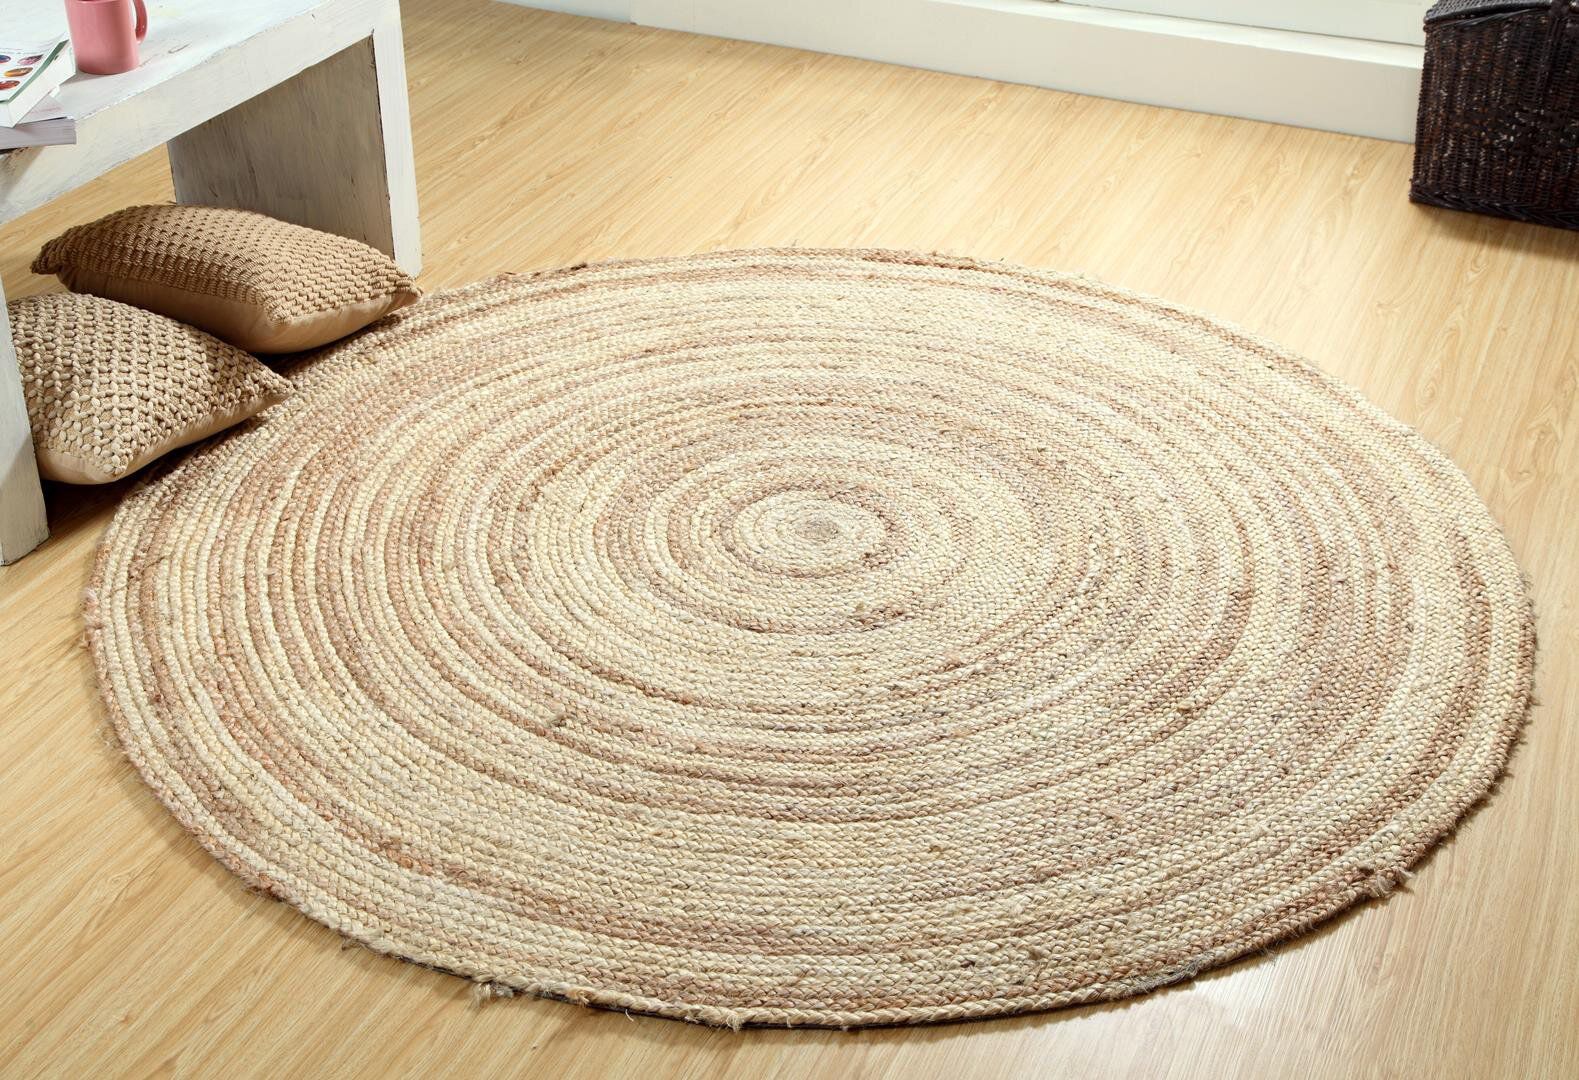 Shopping for Rugs is Hard—These 10 Sites Make it Easy